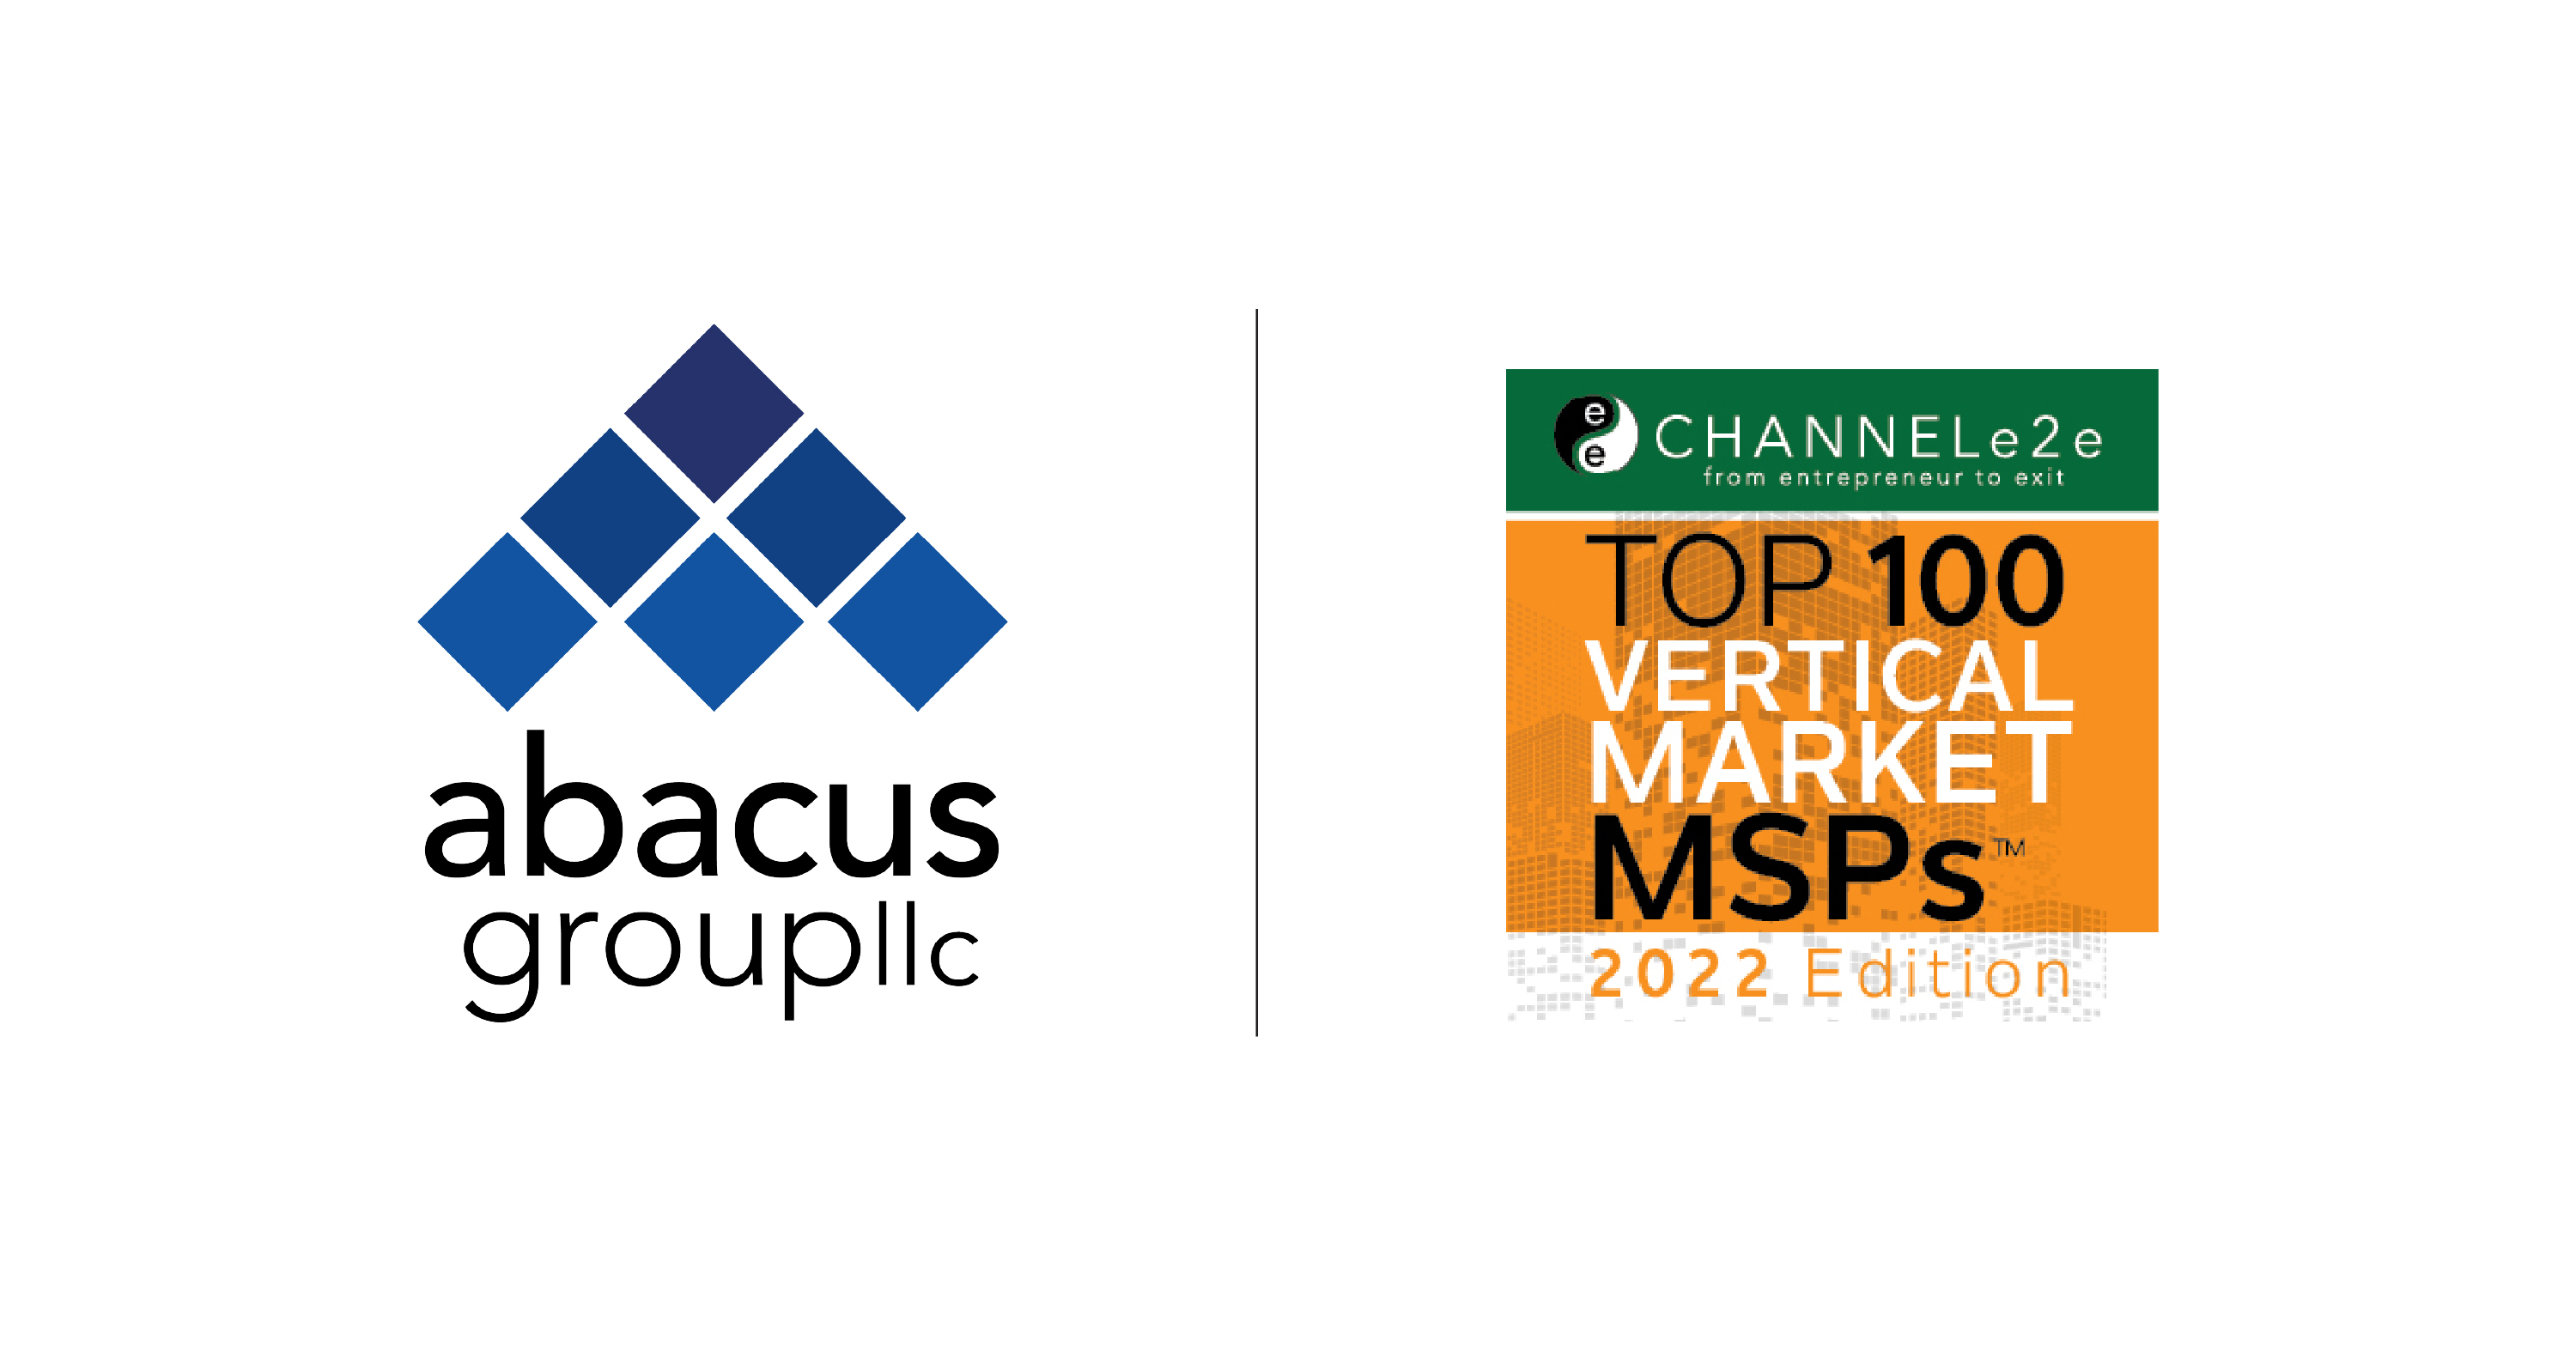 Abacus Group Ranks #12 on ChannelE2E Top 100 Vertical Market MSPs: 2022 Edition